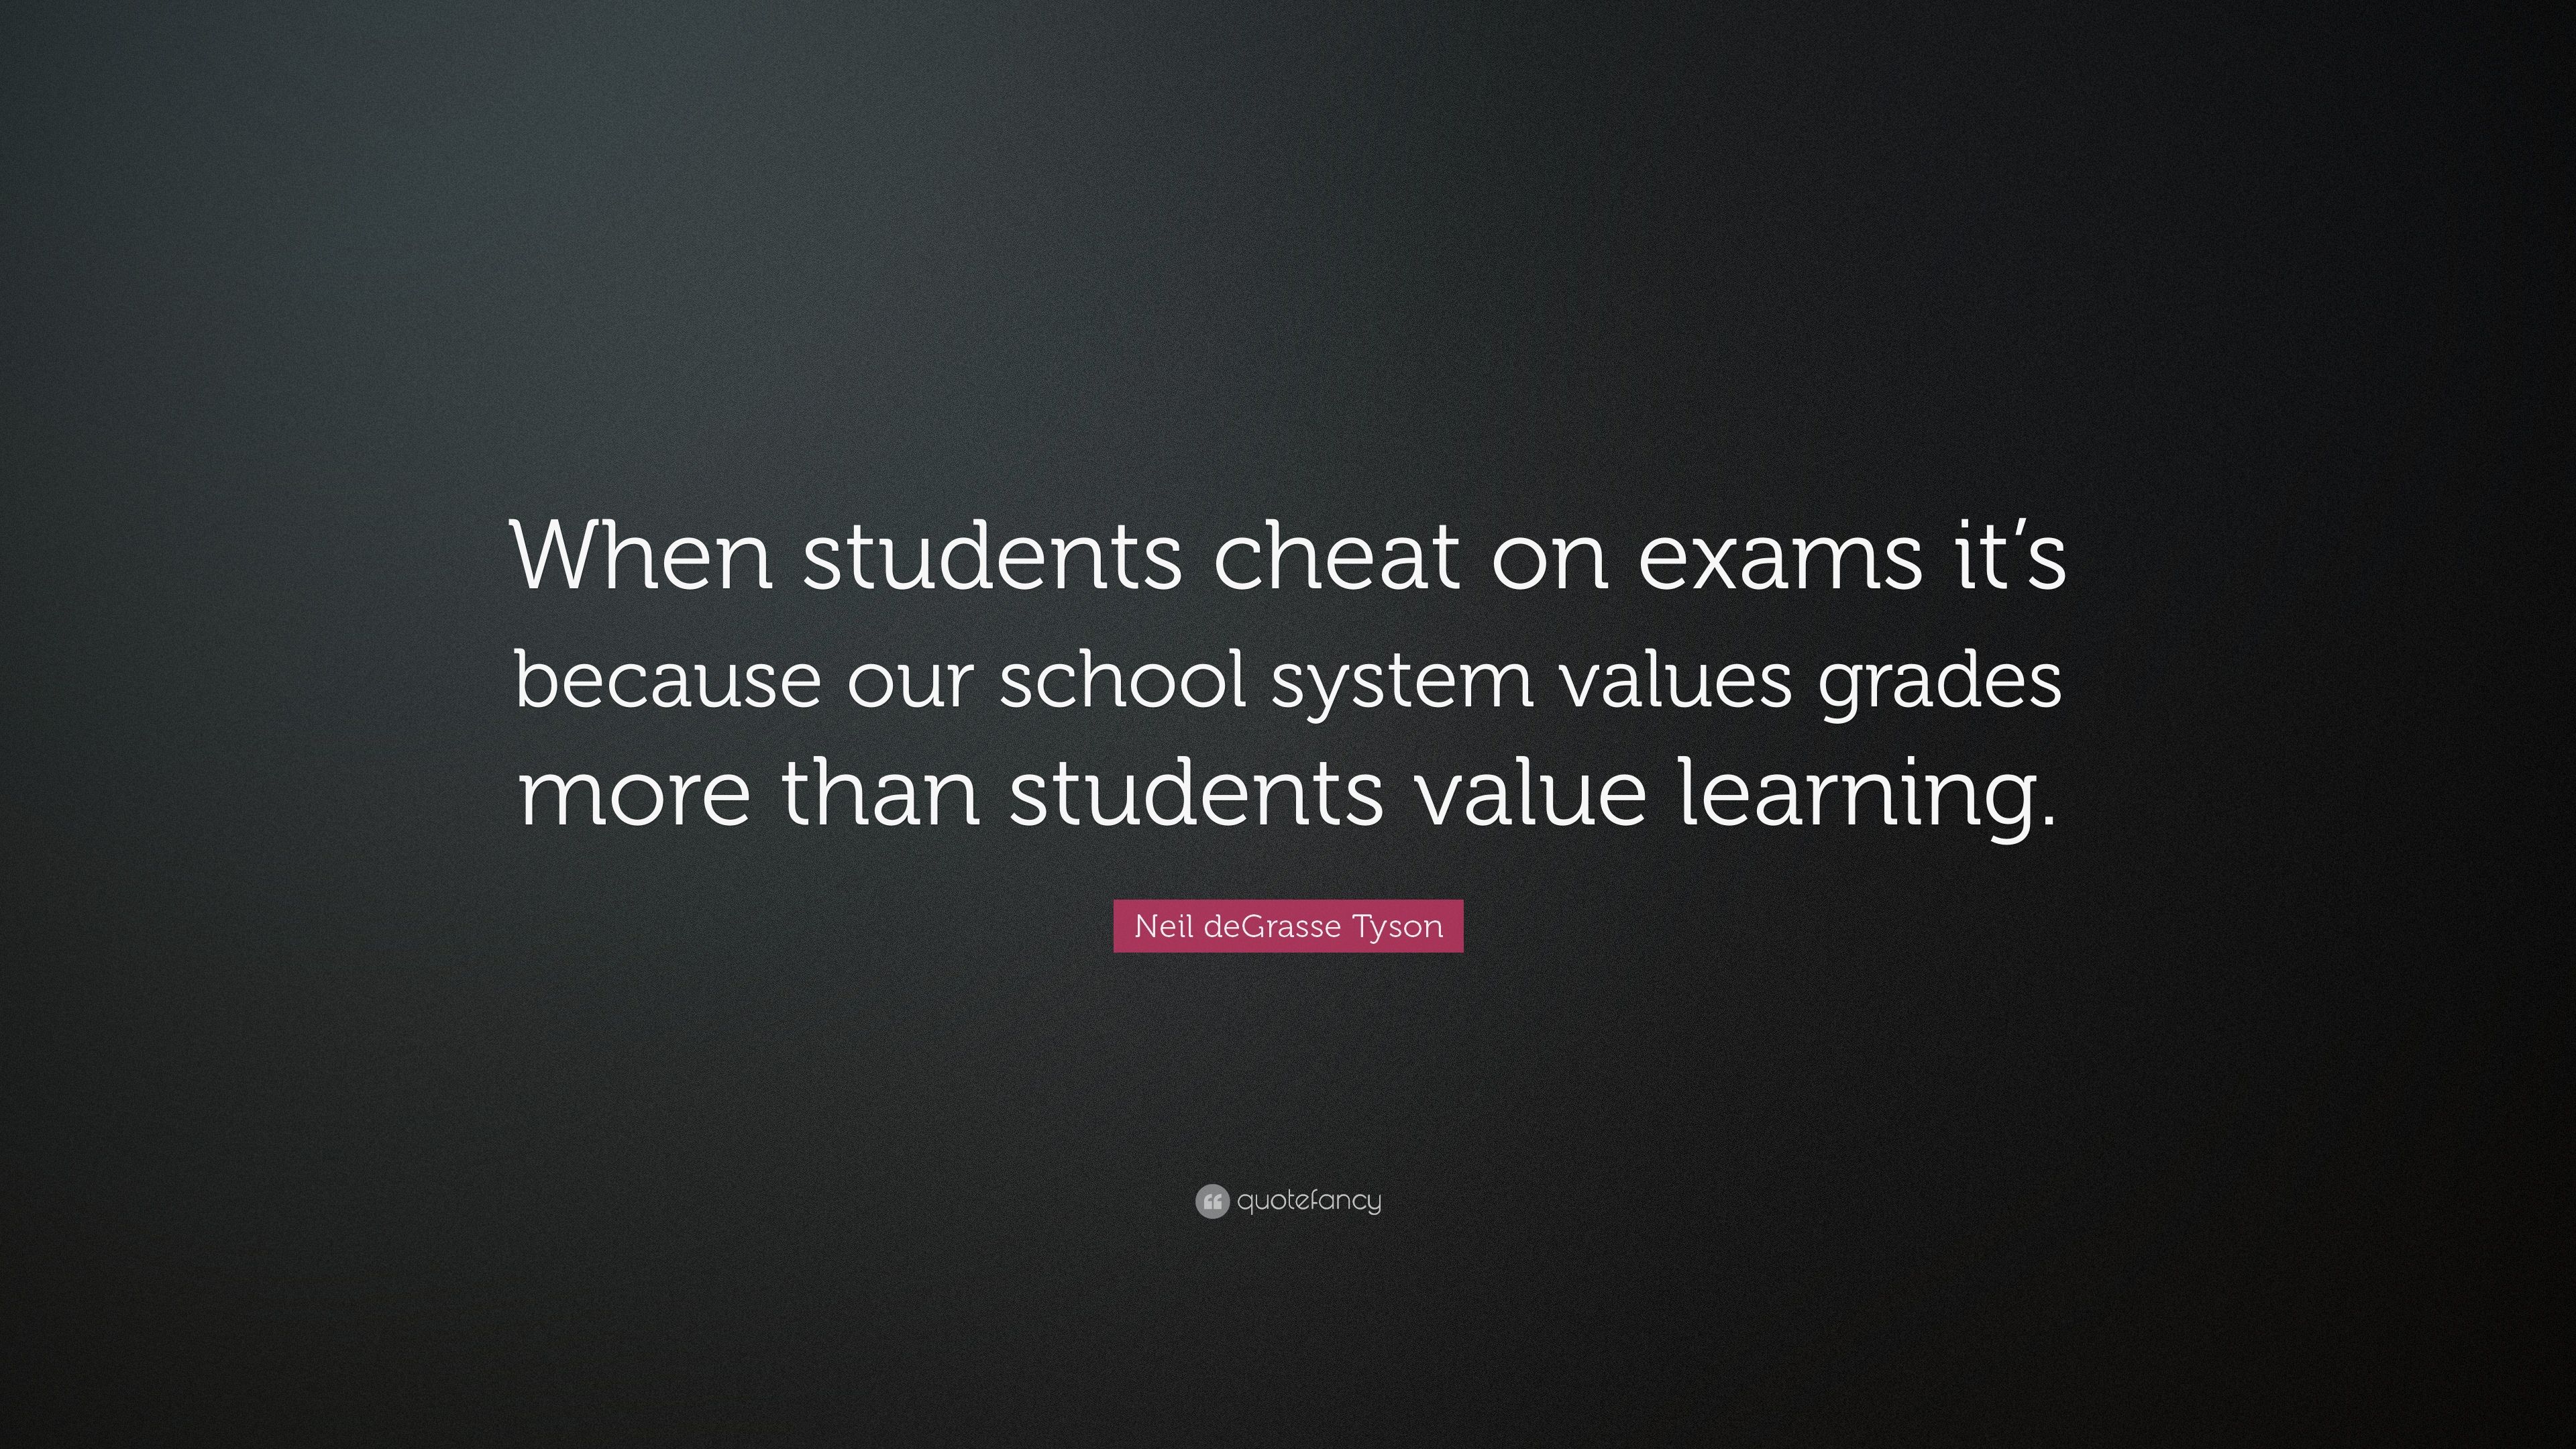 Neil deGrasse Tyson Quote: “When students cheat on exams it's because our school system values grades more than students value learning.” (14 wallpaper)